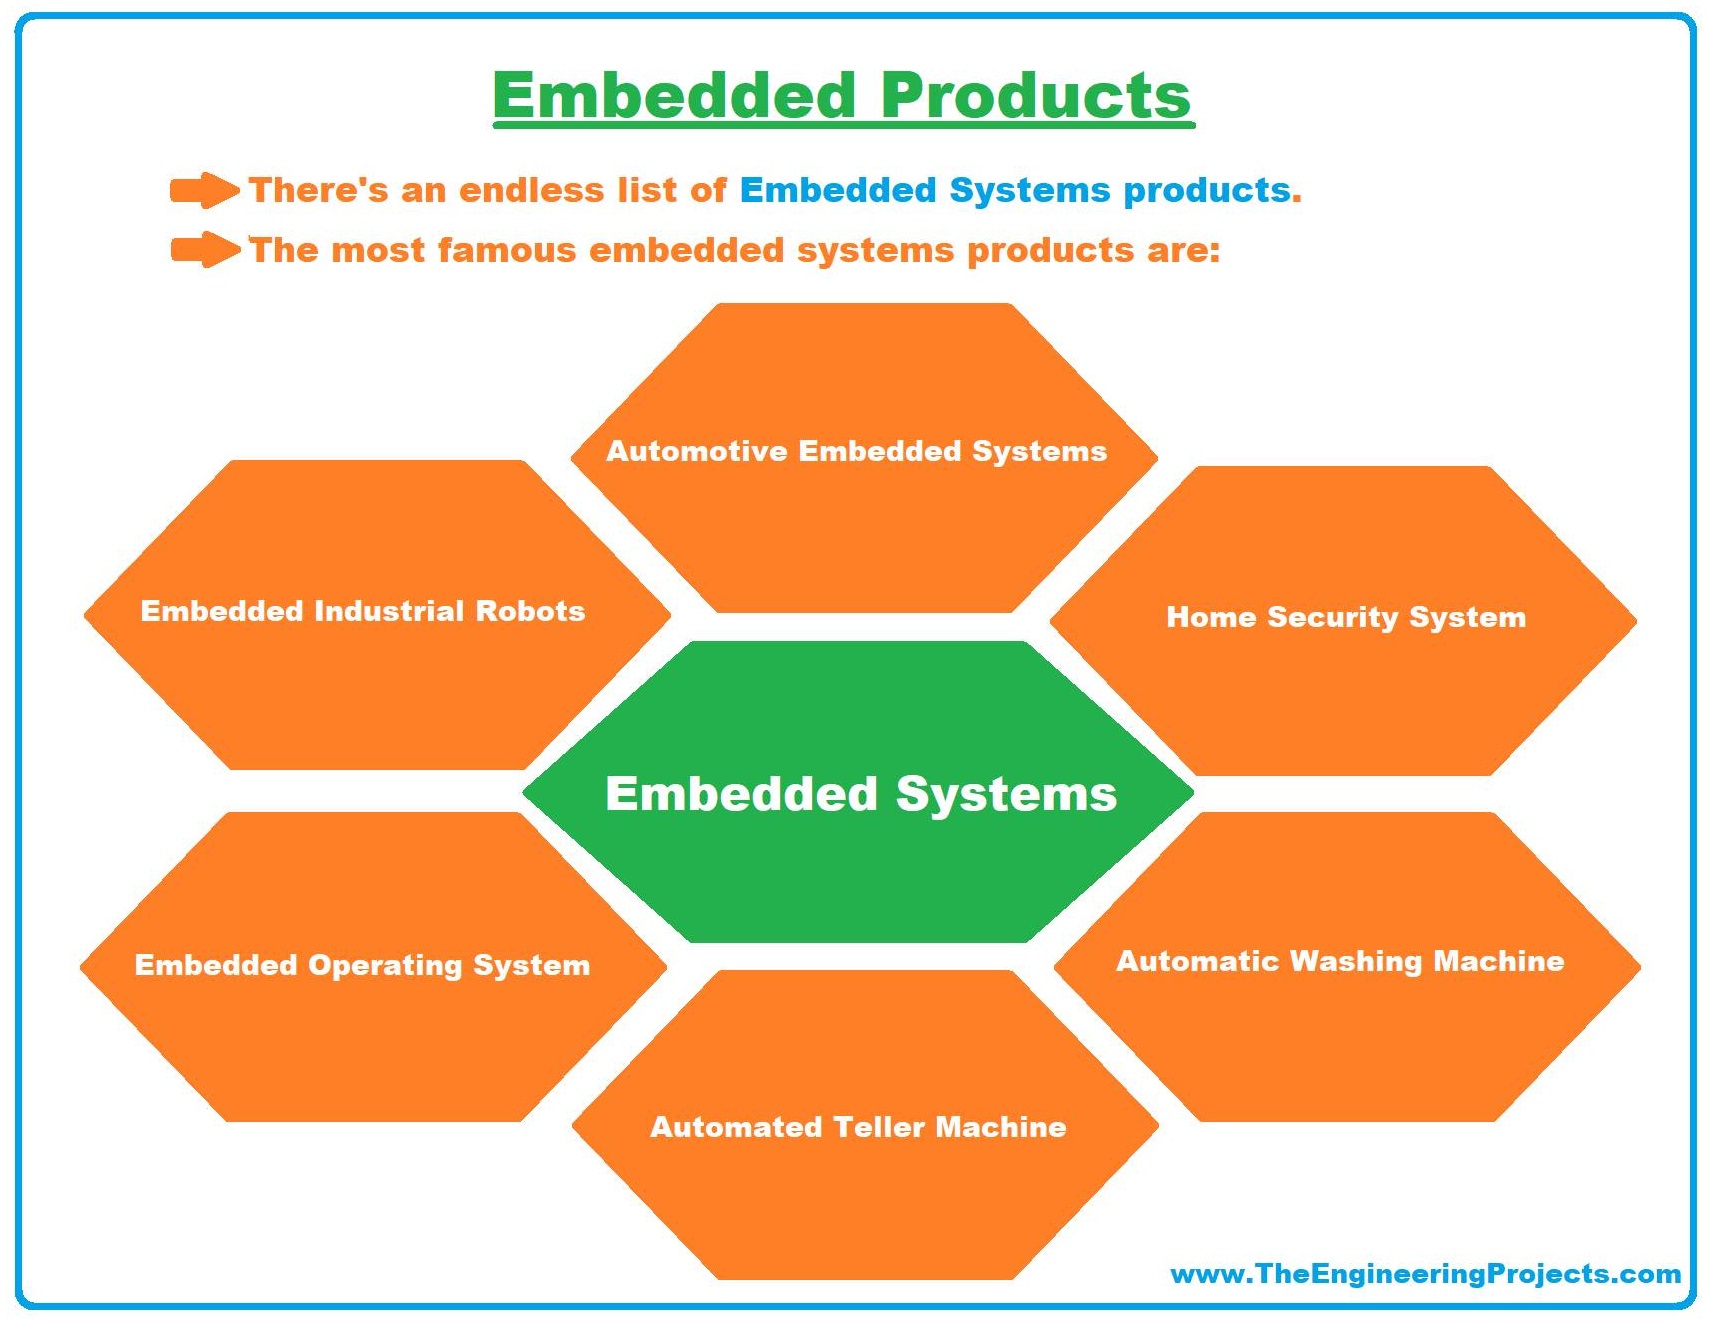 examples of embedded system, embedded systems examples, embedded system real life examples, real life embedded systems examples, embedded products, embedded systems products